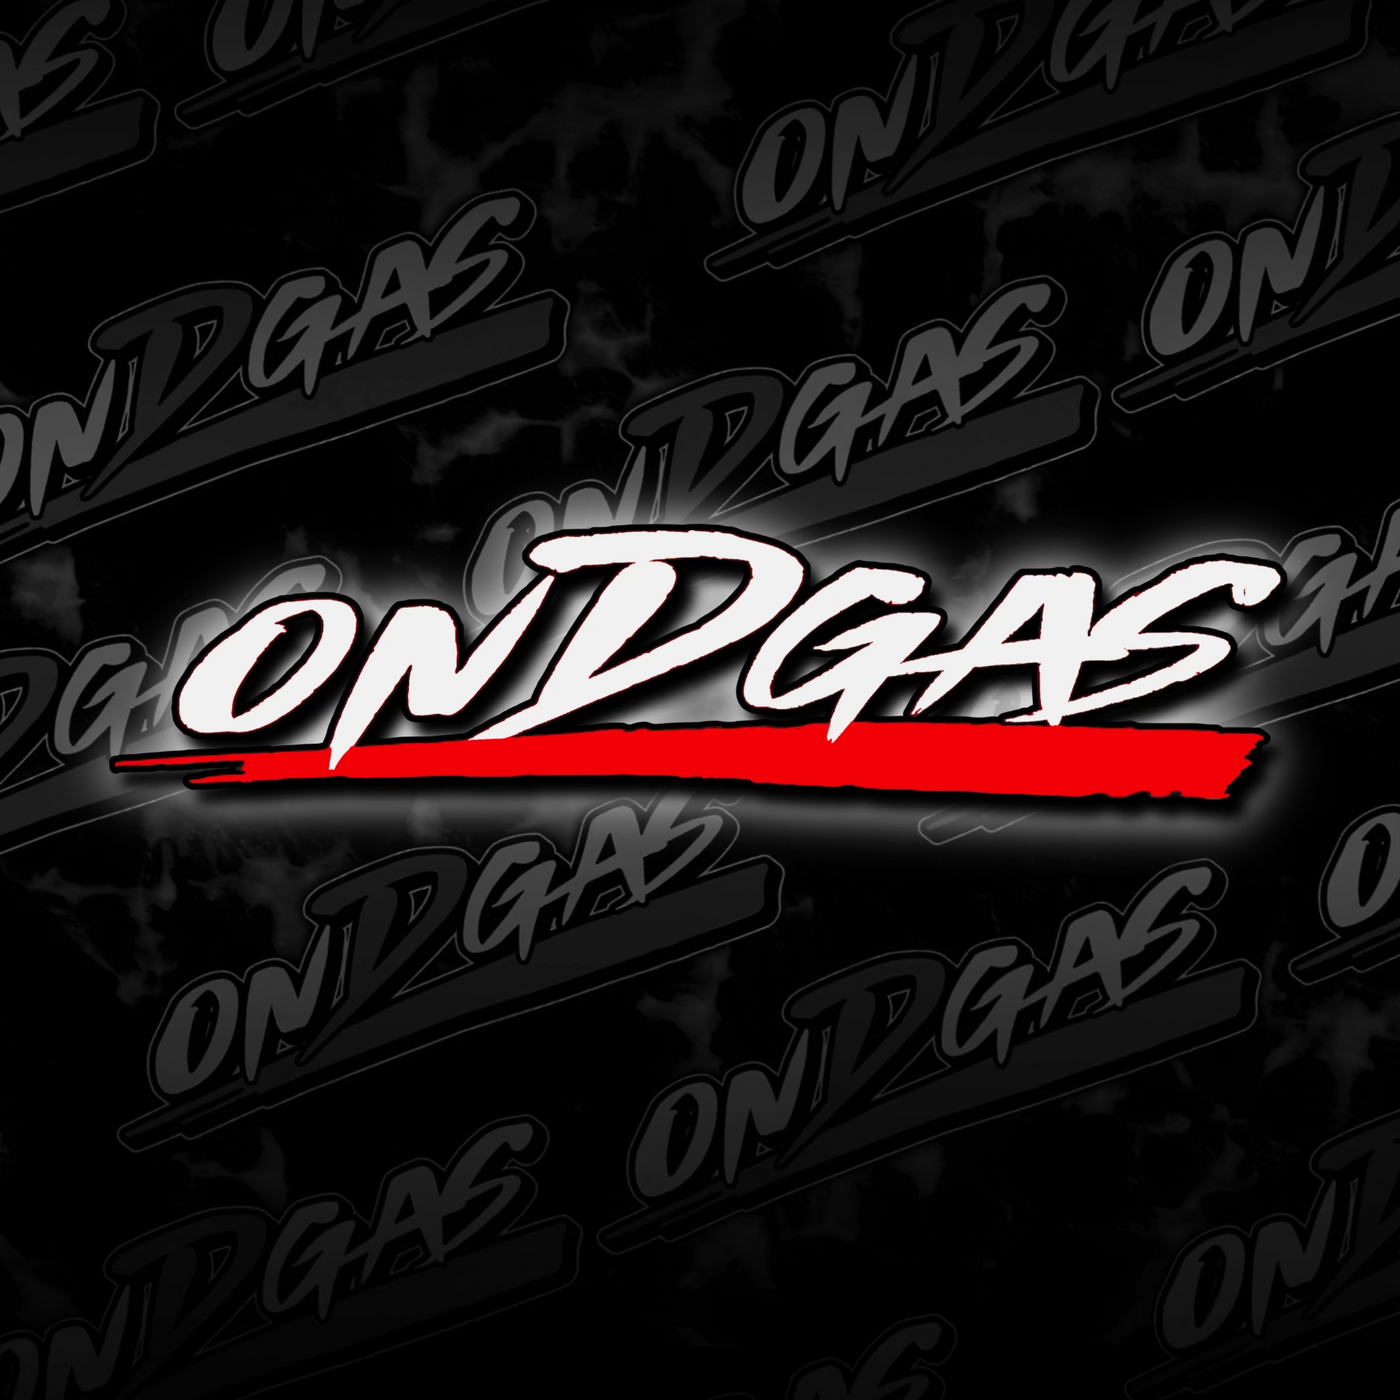 Red Brush White Reflective ONDGAS Decal